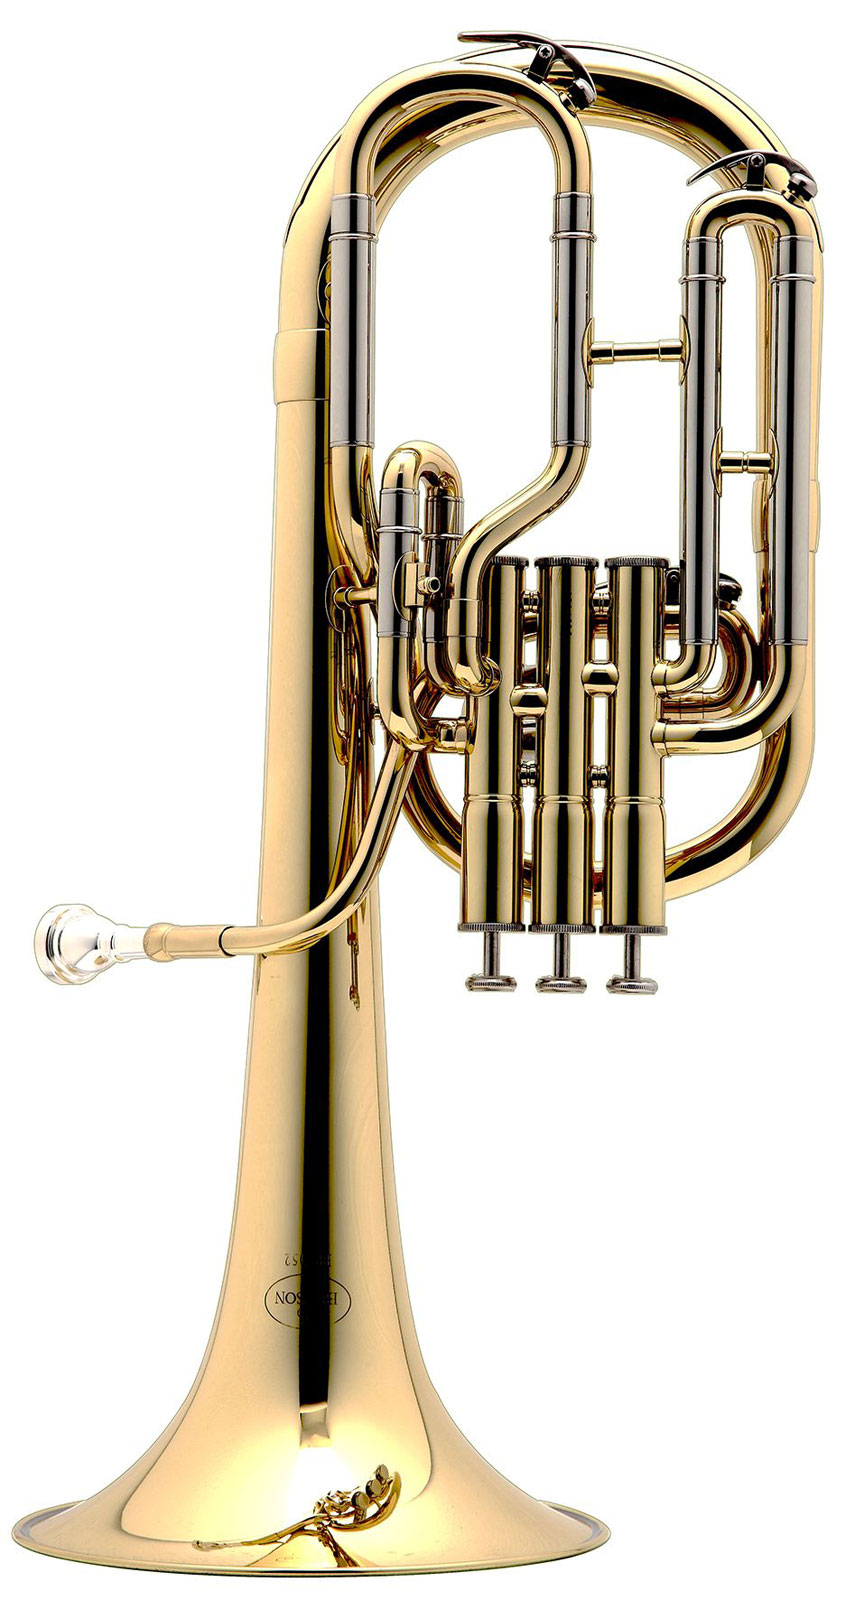 BESSON BE152-1-0 - TENOR PRODIGE HORN LACQUERED